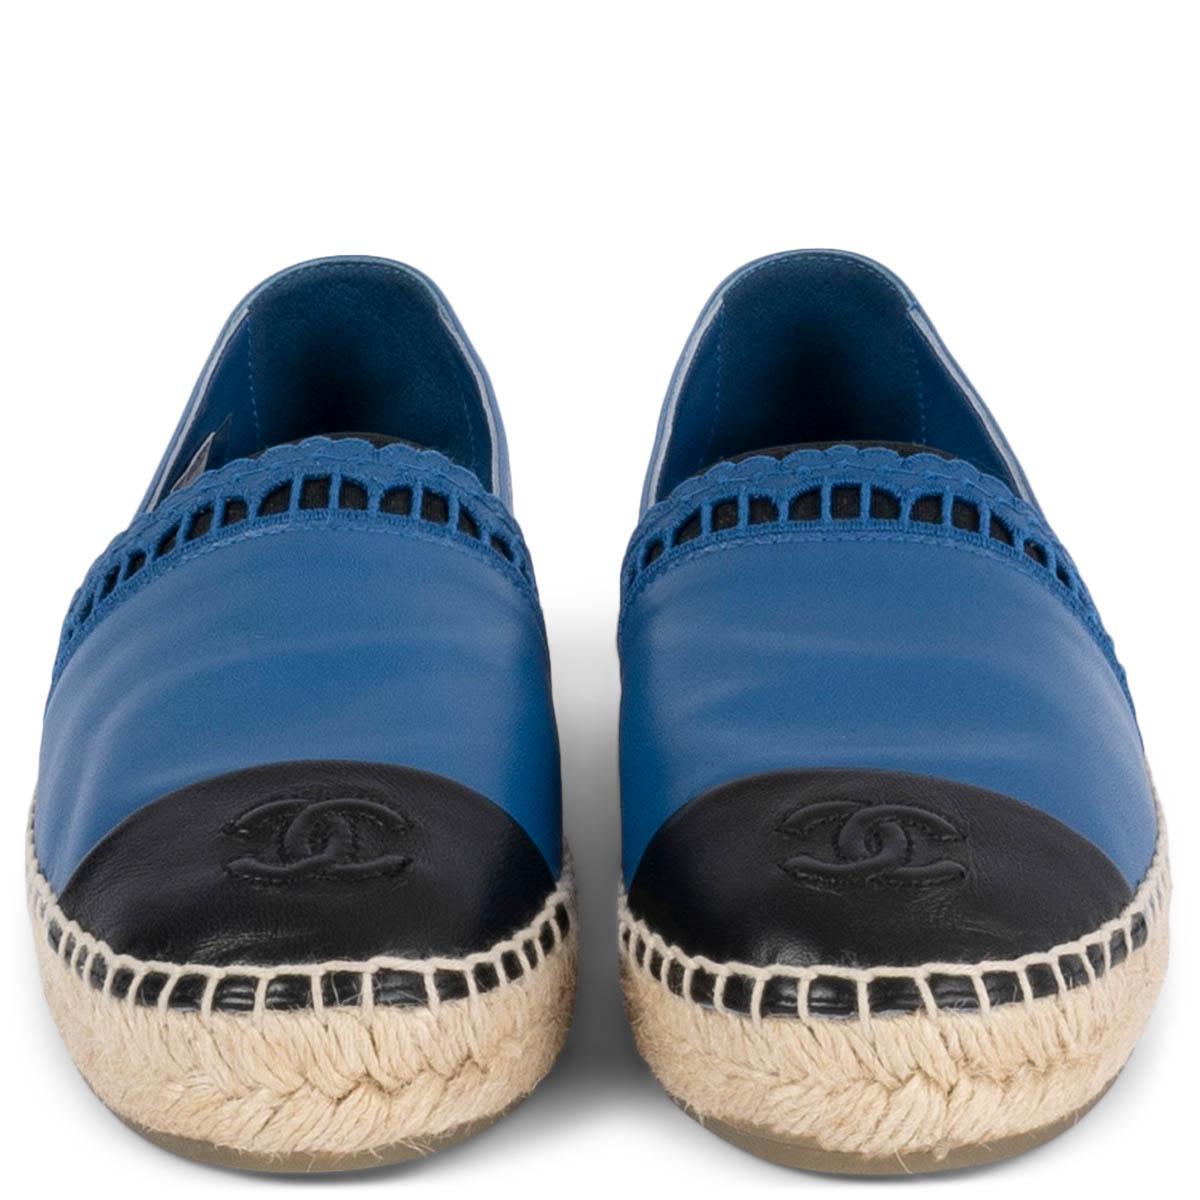 100% authentic Chanel CC Espadrilles in blue and black lambskin and a classic beige raffia and rubber sole. The design features a scalloped cut-out edge and black elastic band. Have been worn and are in excellent condition. 

2019